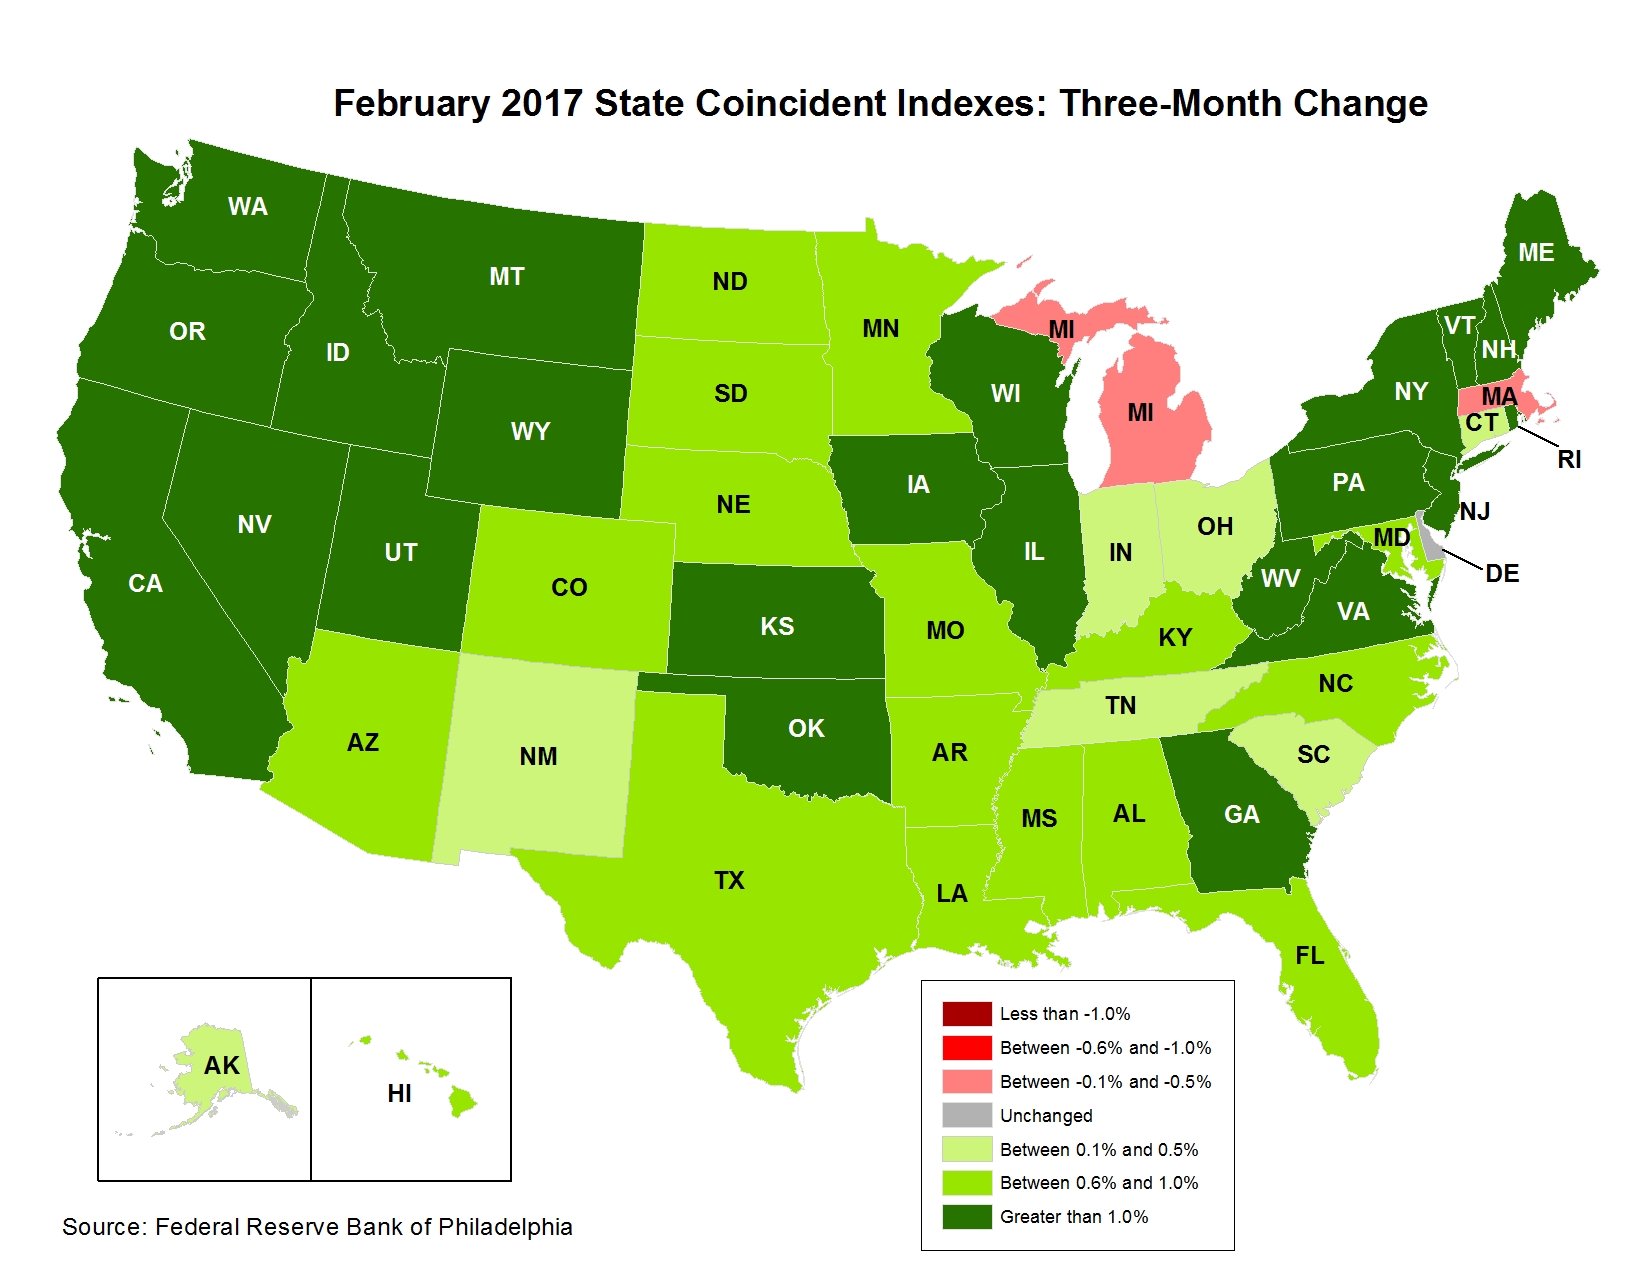 Map of the U.S. showing the State Coincident Indexes Three-Month Change in February 2017